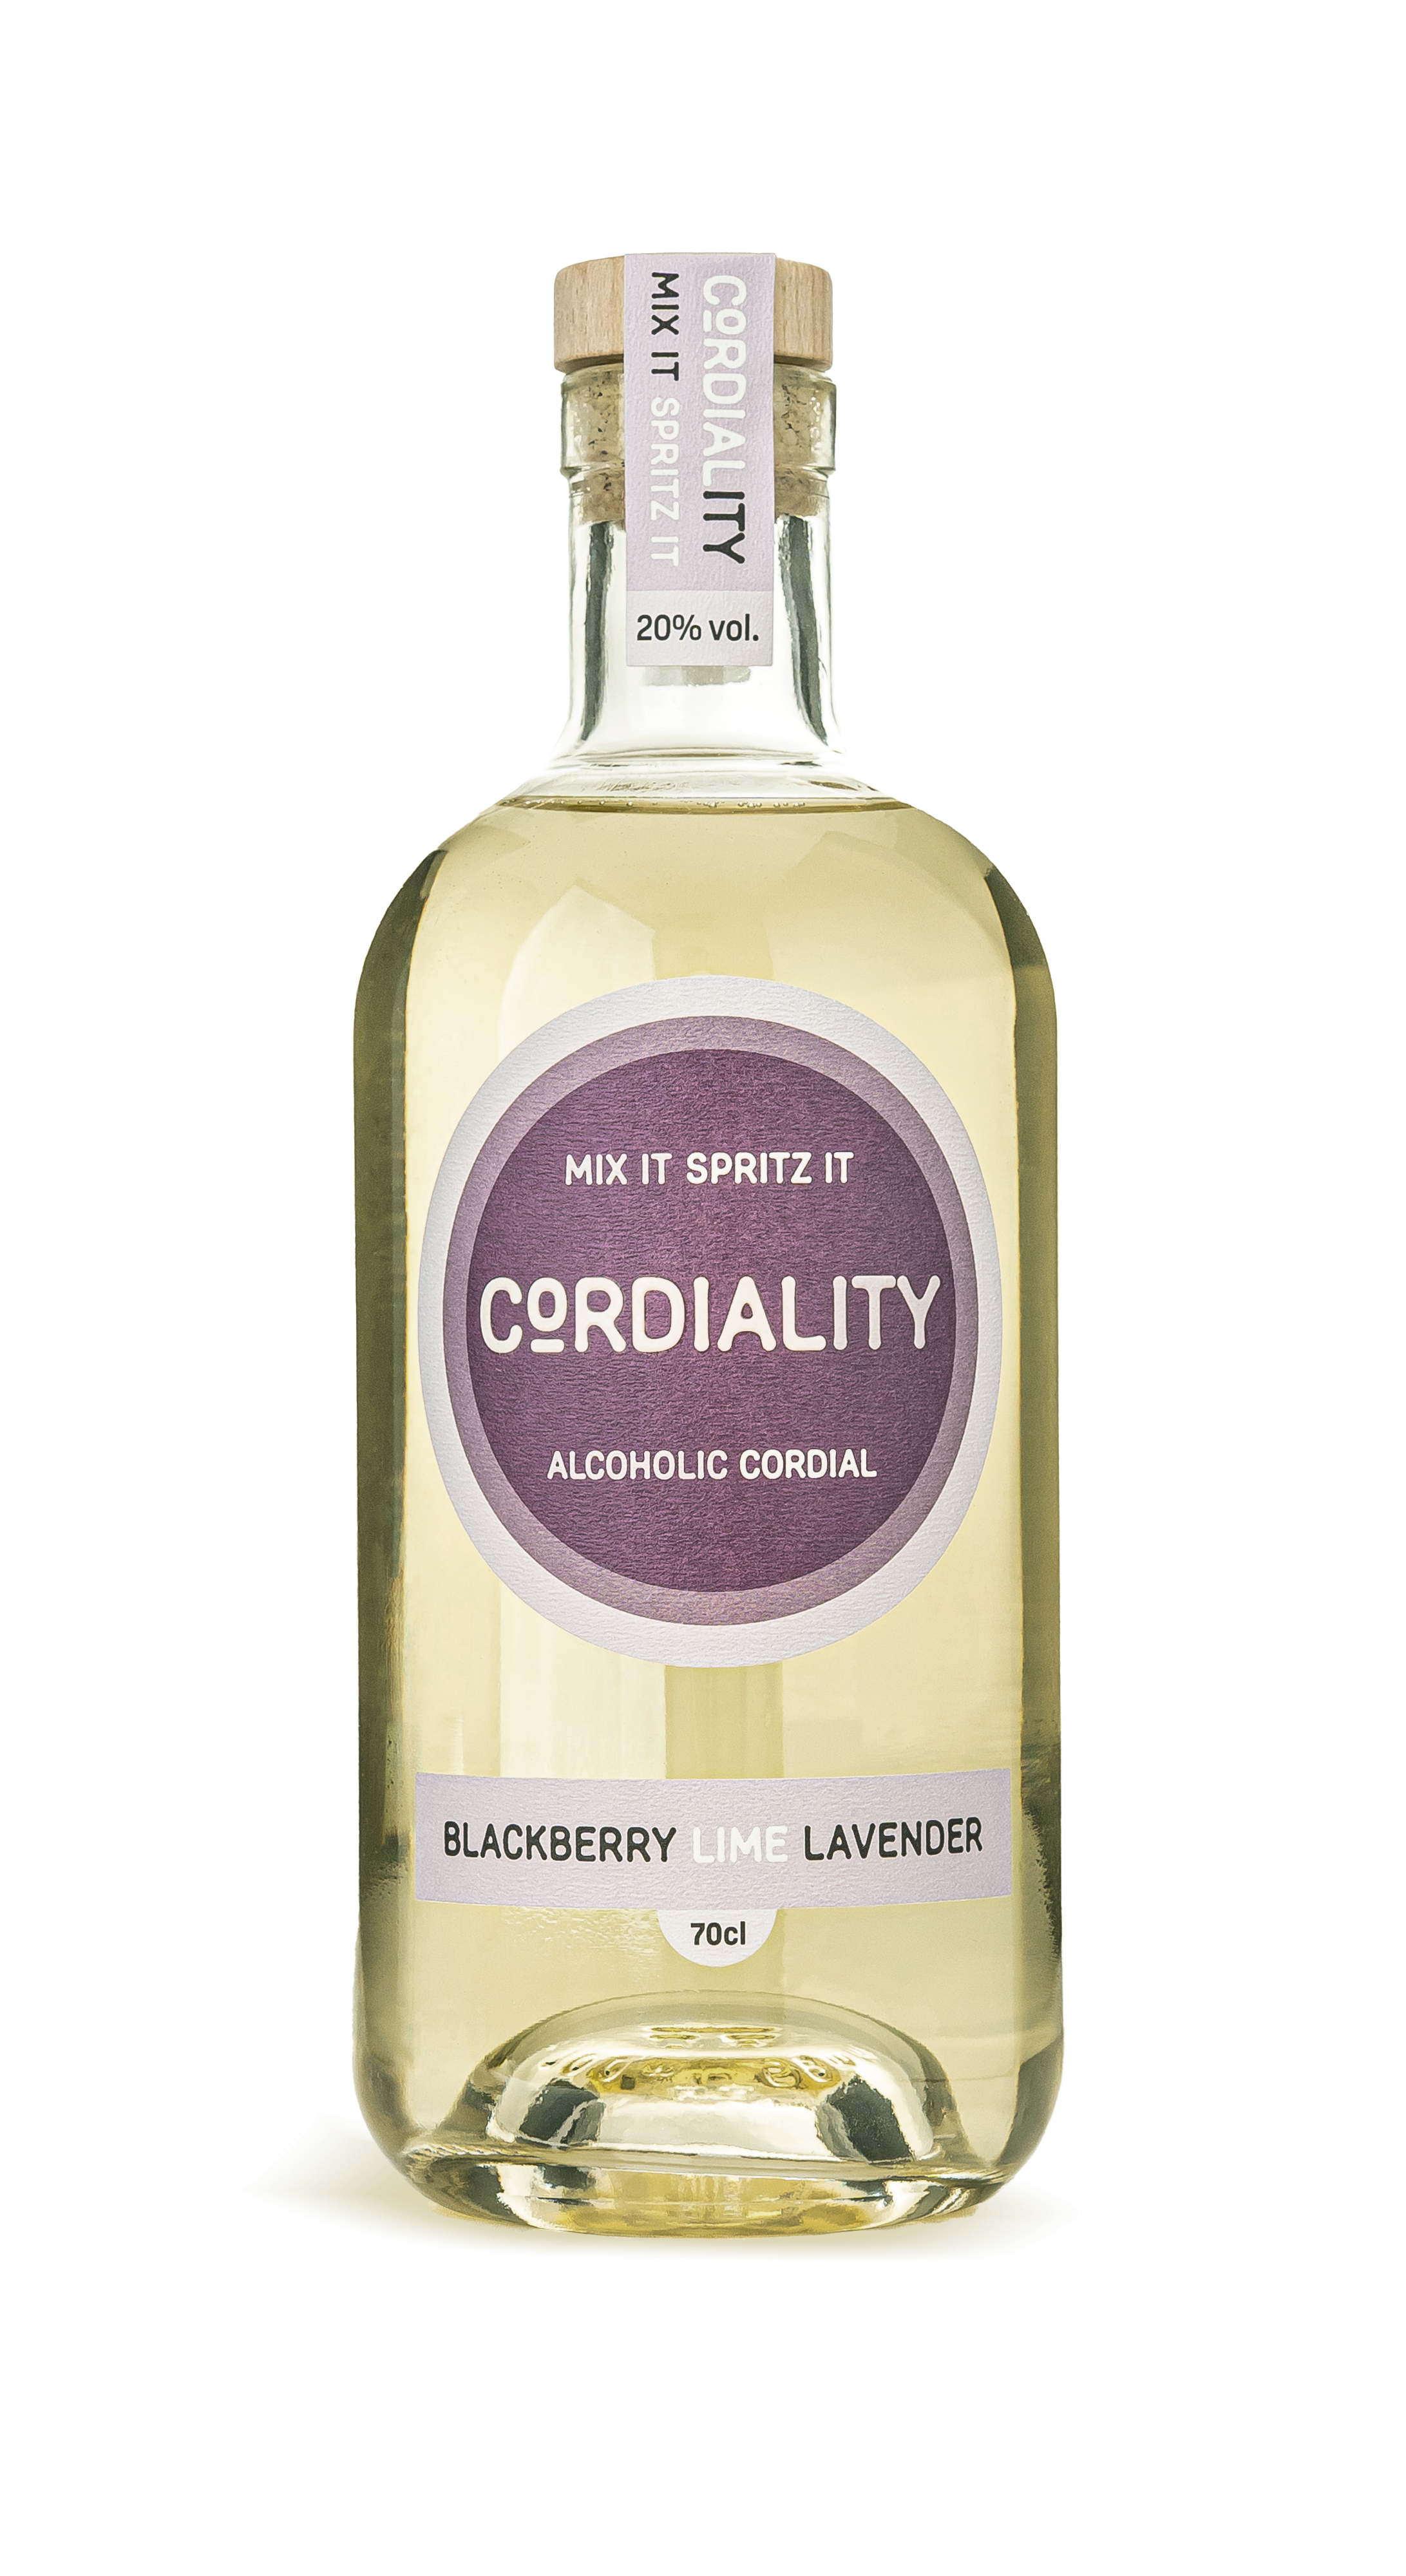 Peach, Pear & Bay - Natural Fruit and Herb Flavour Cordial